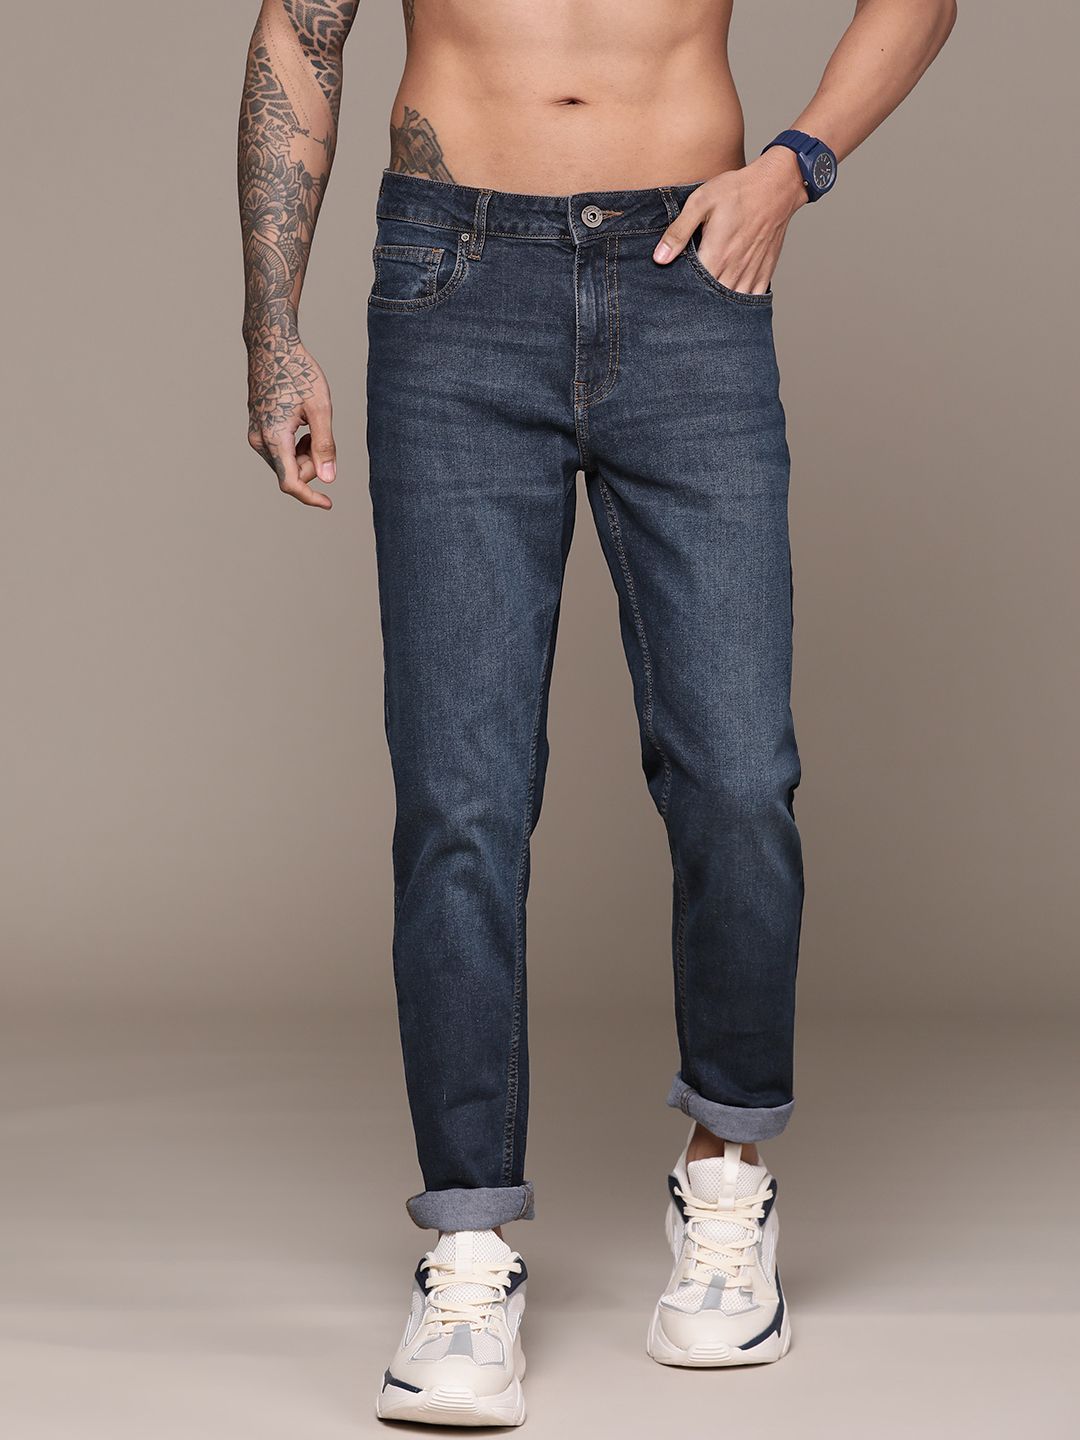 The Roadster Lifestyle Co. Men Slim Tapered Fit Jeans